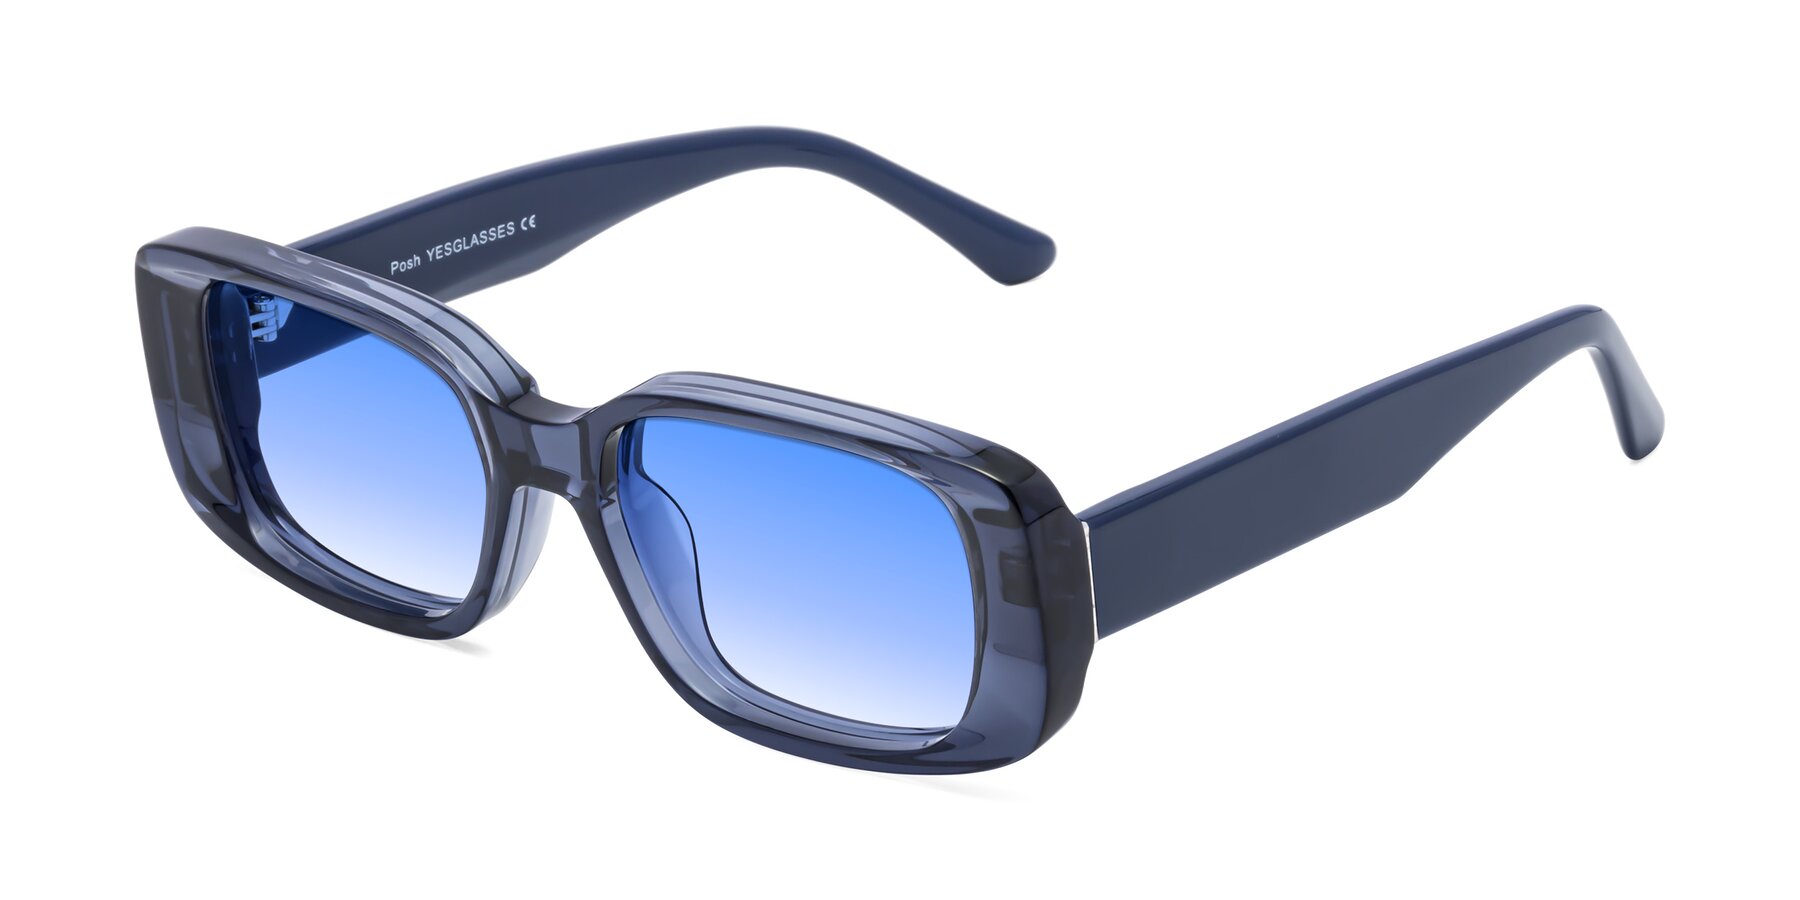 Angle of Posh in Translucent Blue with Blue Gradient Lenses